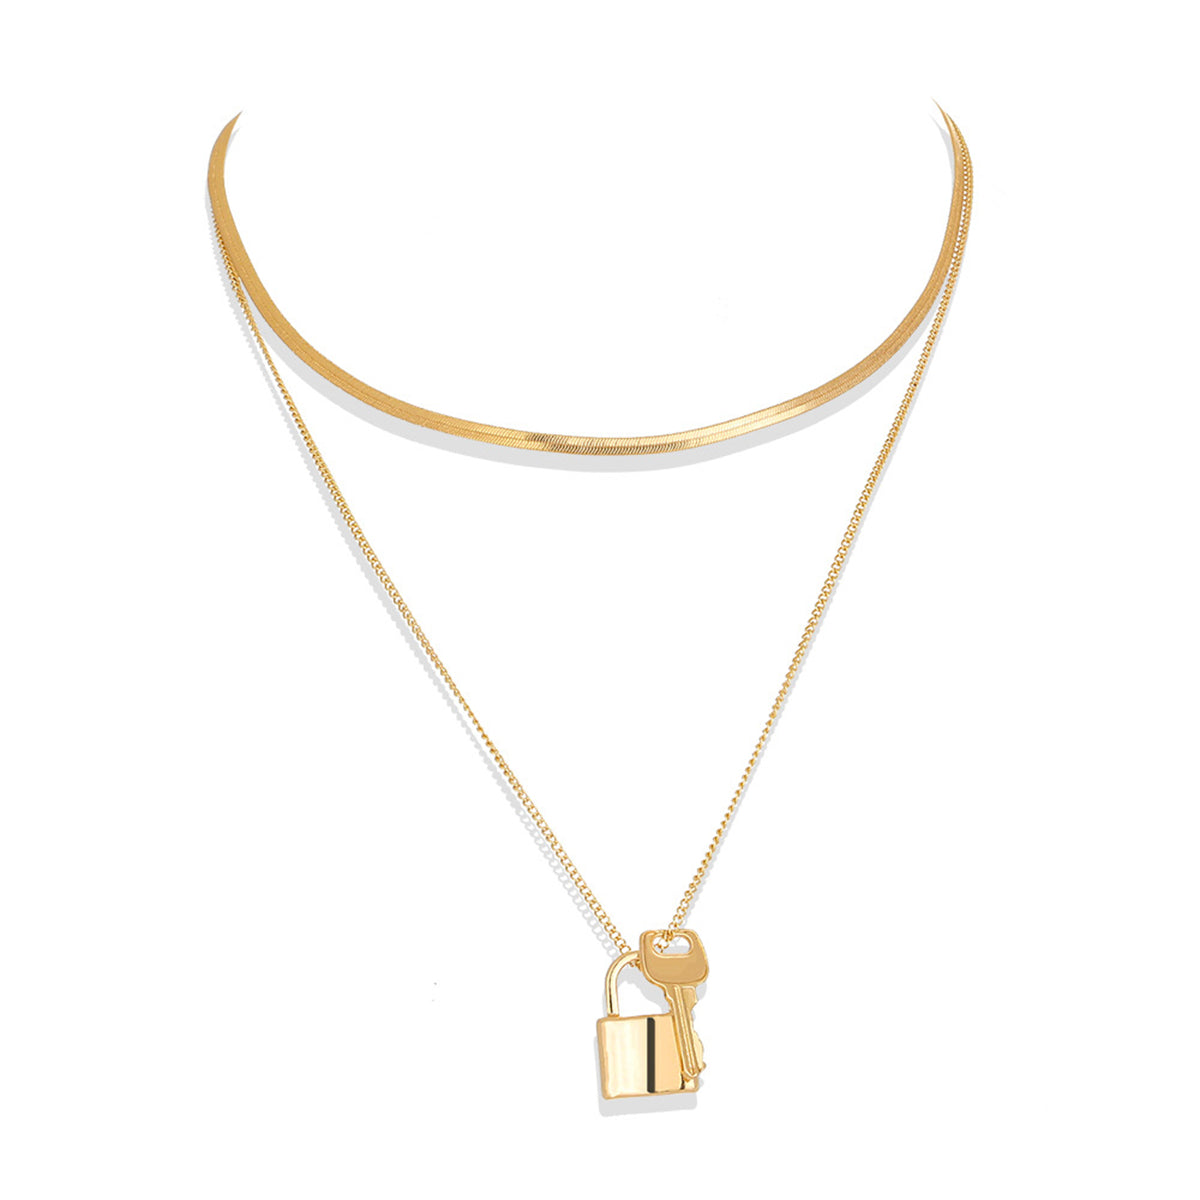 18K Gold-Plated Key & Lock Layered Pendant Necklace